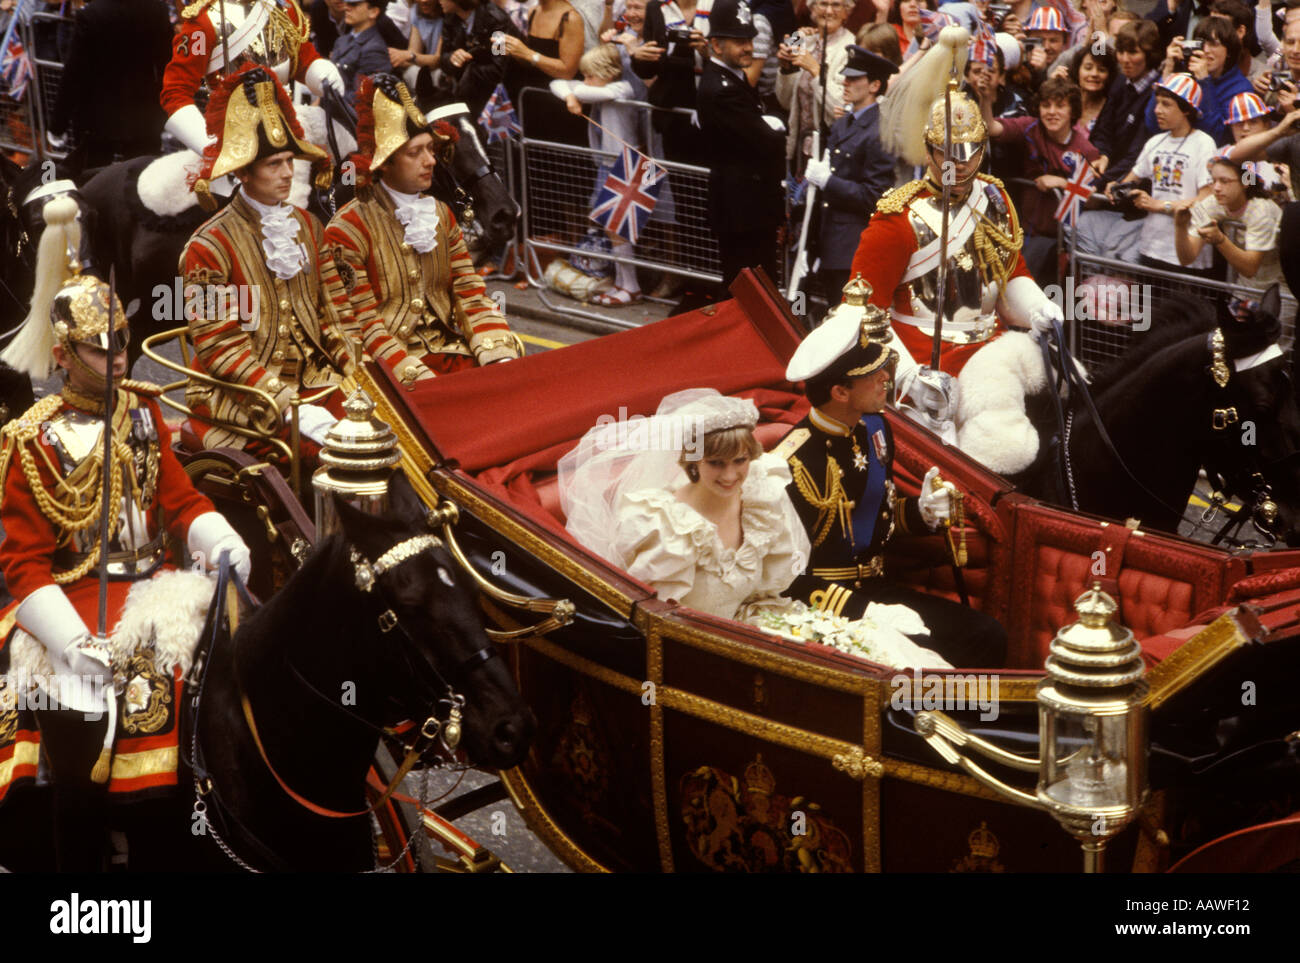 Prince Charles Lady Diana Spencer royal wedding crowds London.  29th July 1981 open carriage down The Mall  returning to Buckingham Palace. 1980S UK Stock Photo